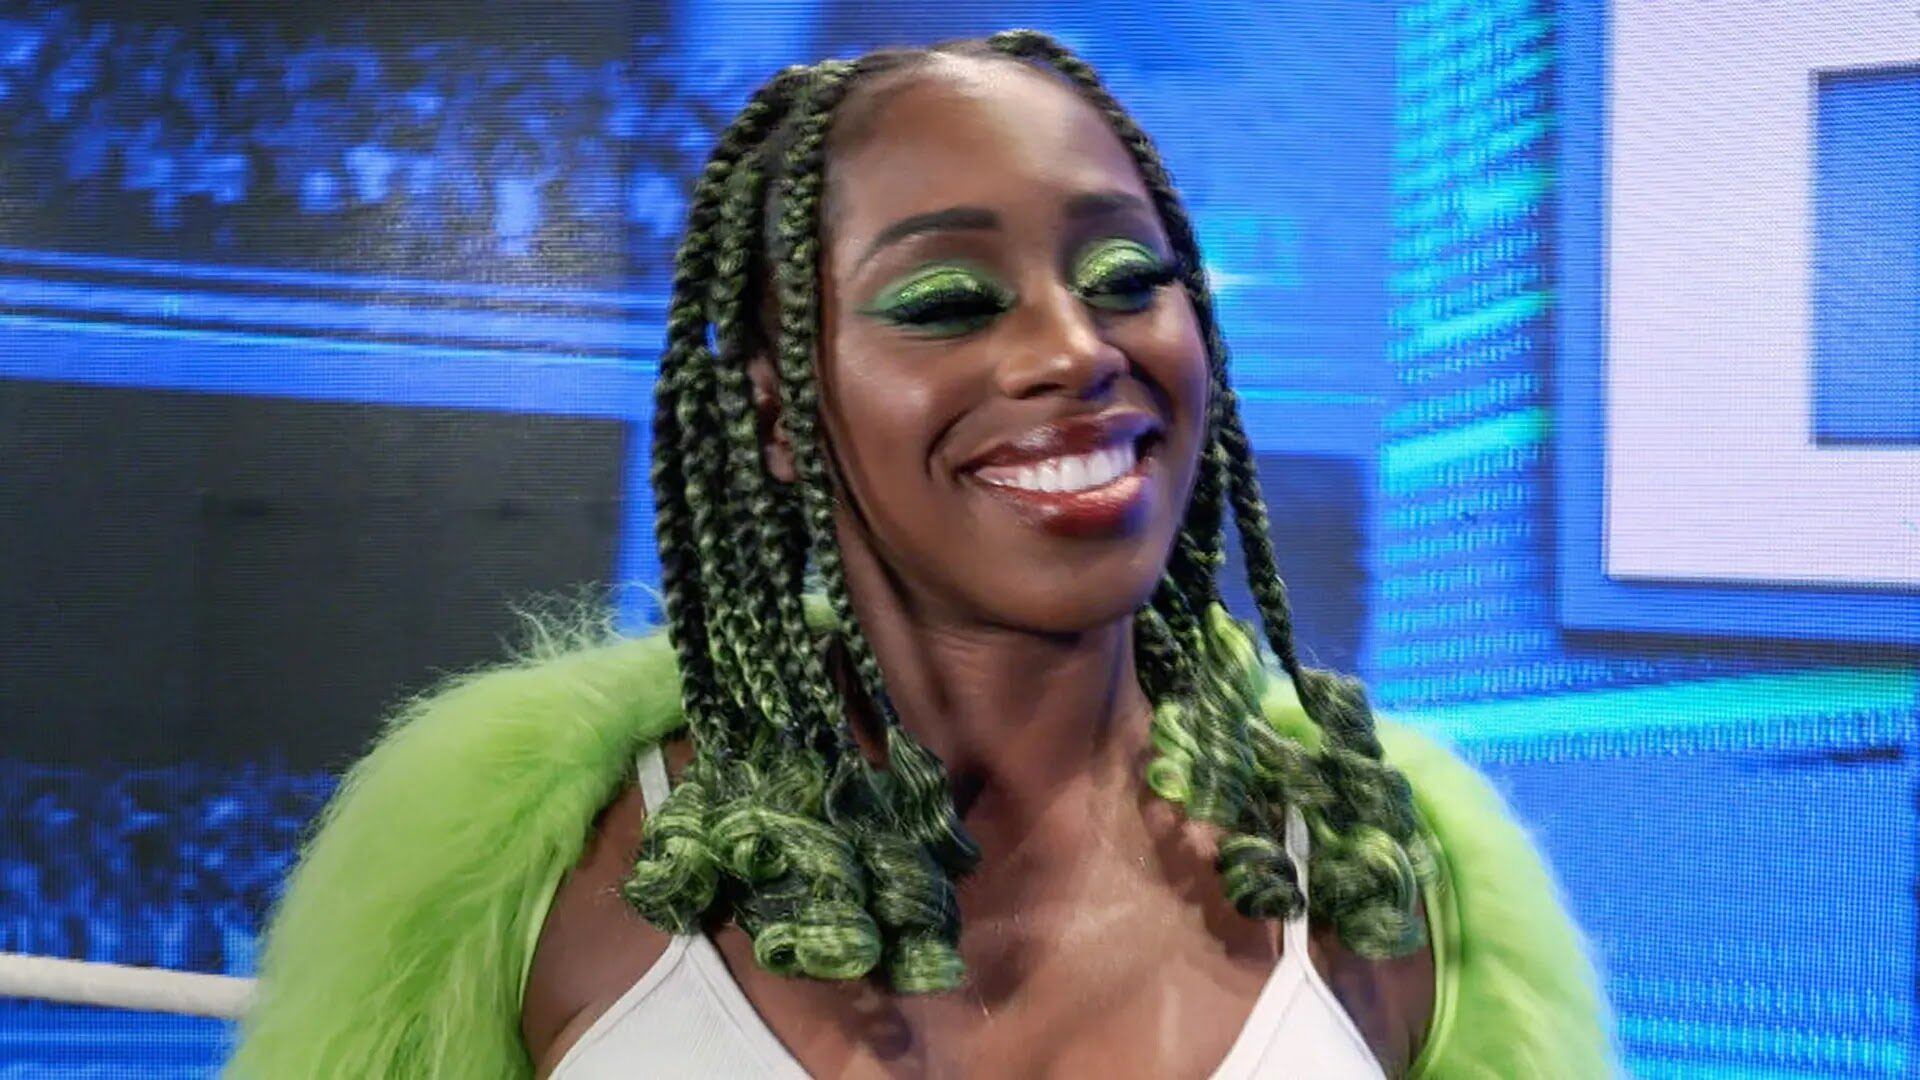 Naomi Confirms Her First TV Appearance After Being Suspended From WWE